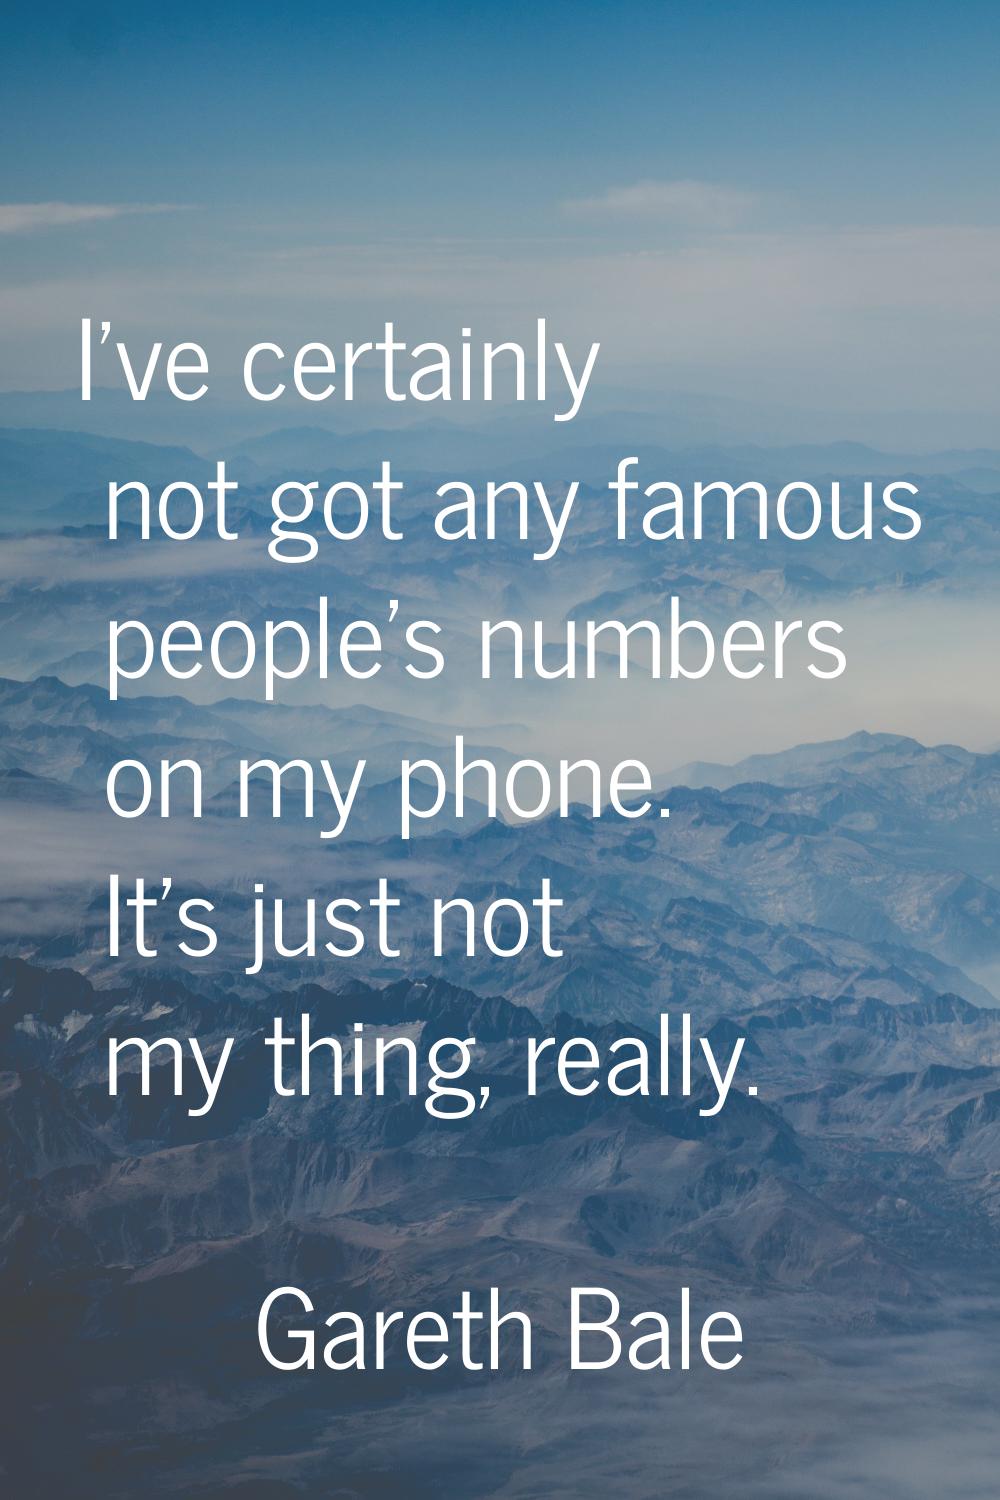 I've certainly not got any famous people's numbers on my phone. It's just not my thing, really.